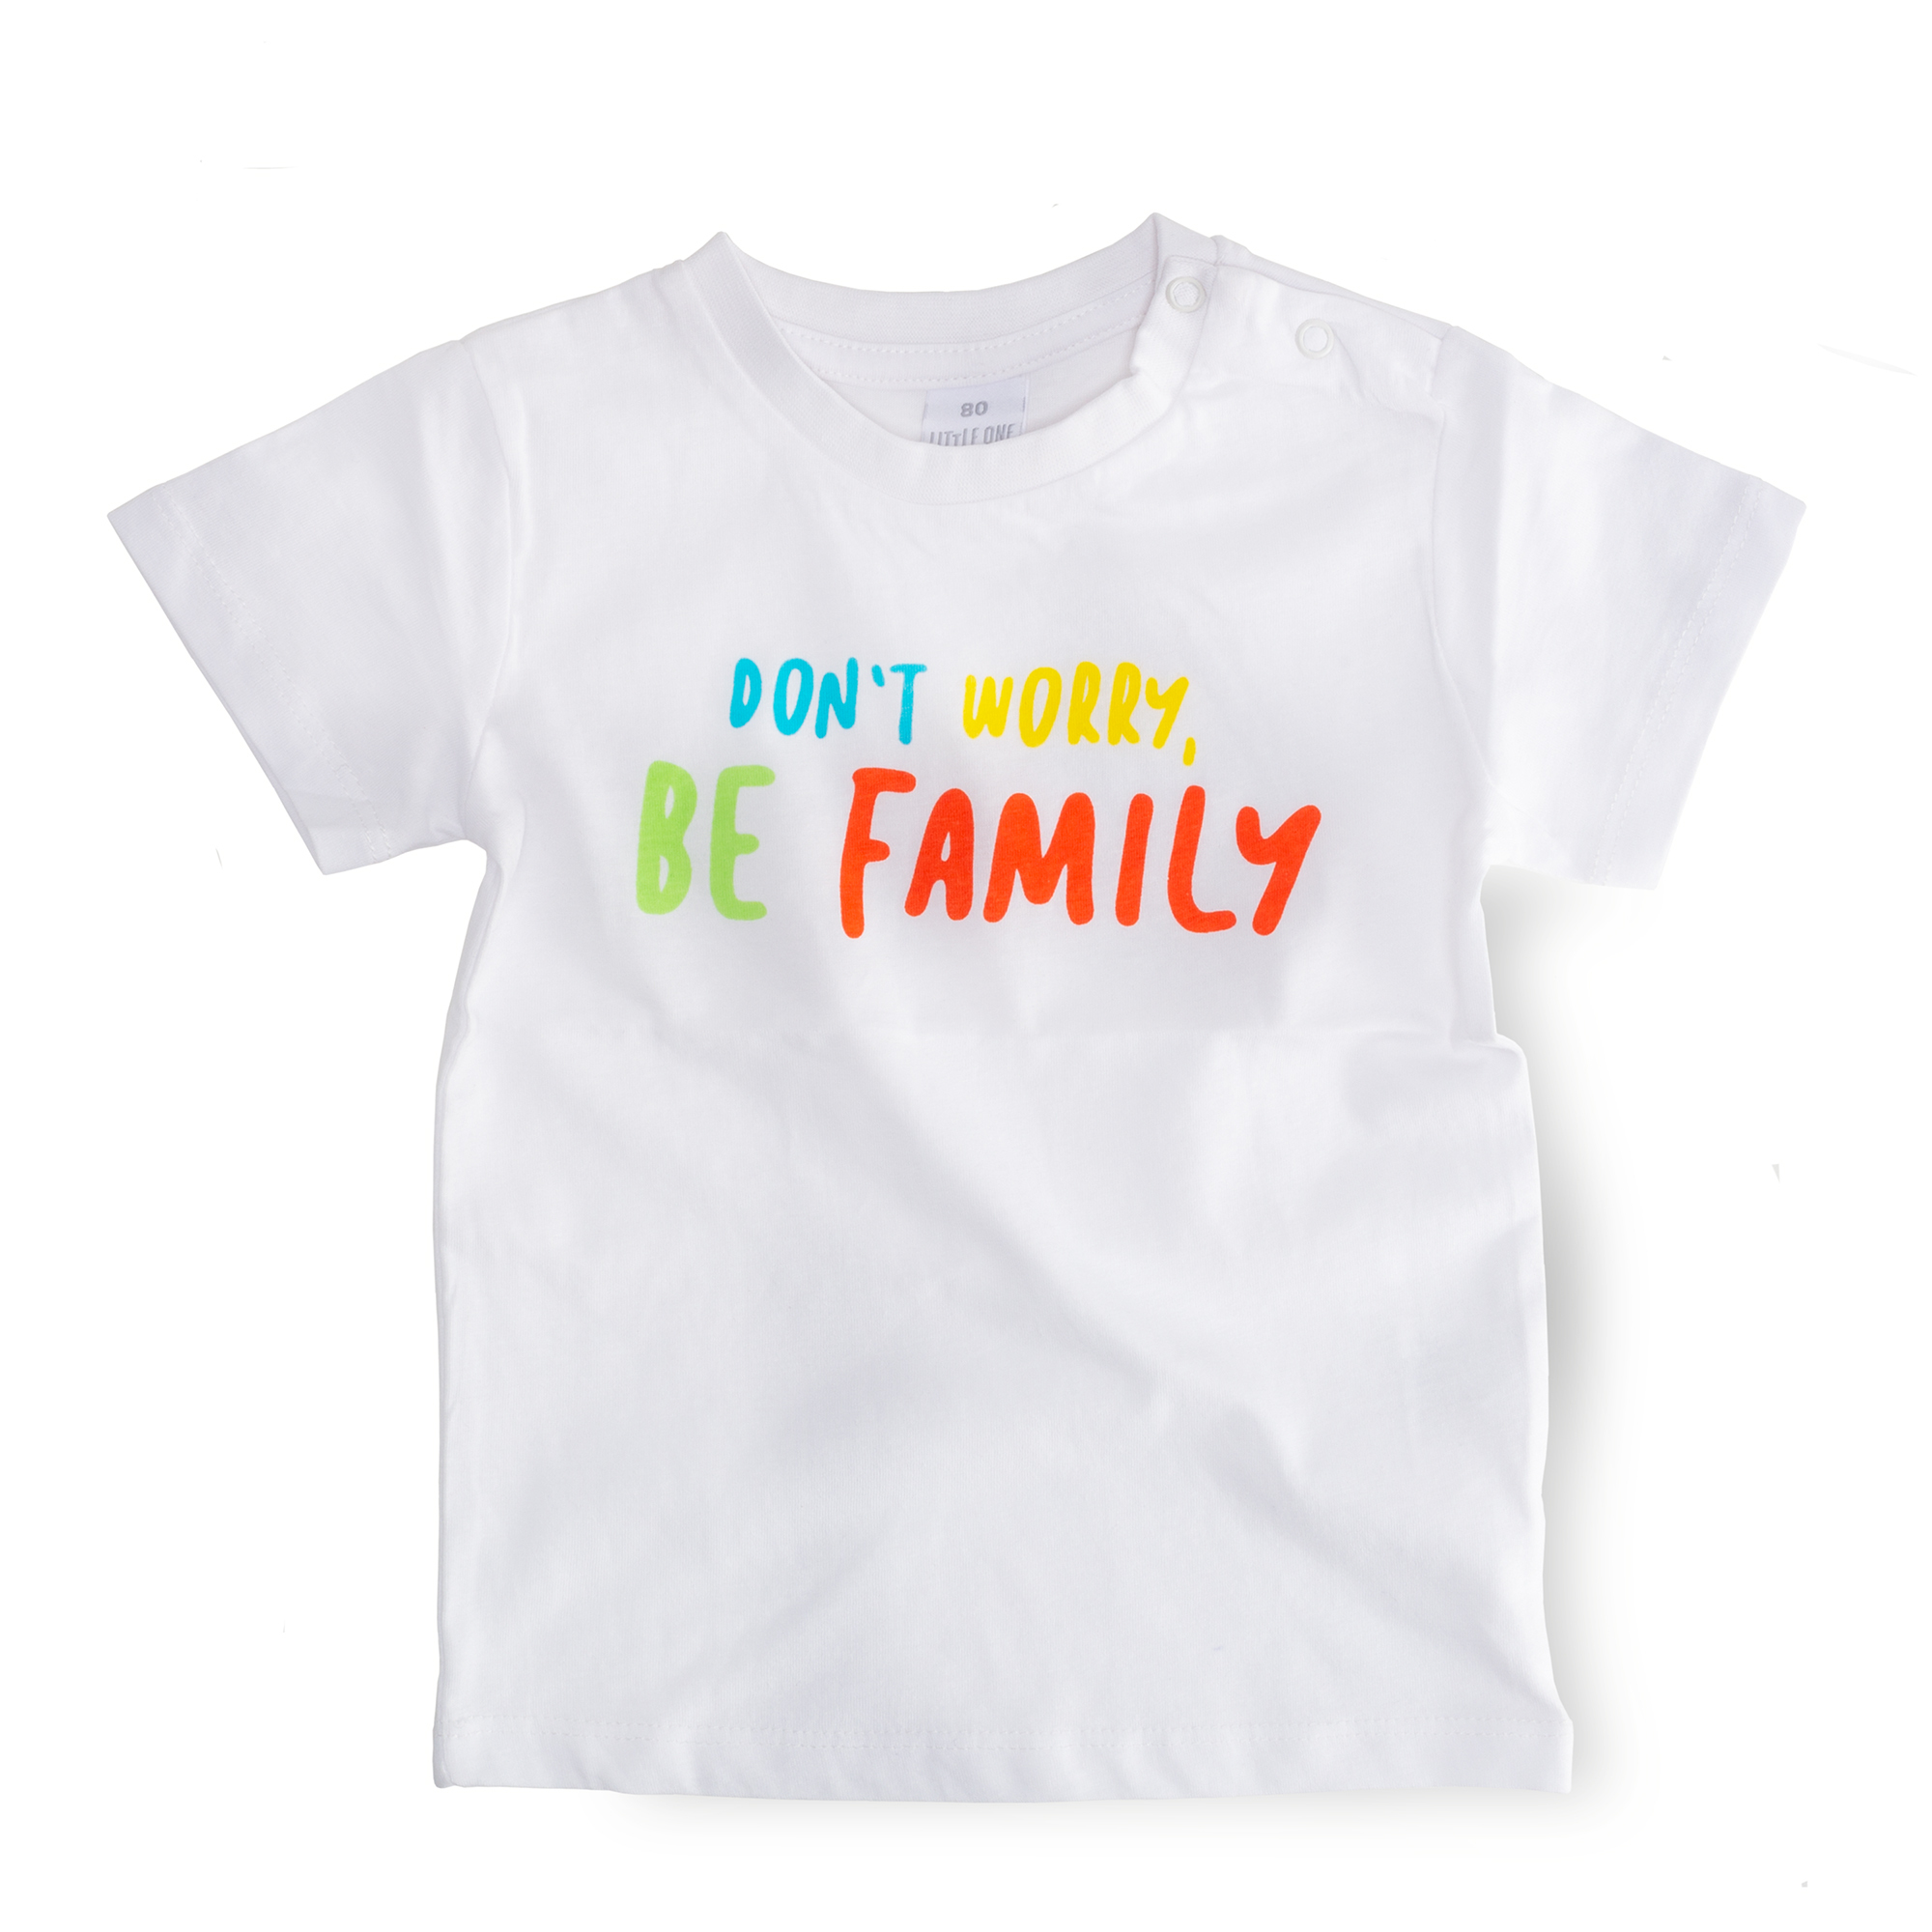 T-Shirt "Don't worry, be family" LITTLE ONE Weiß M2000584432509 1